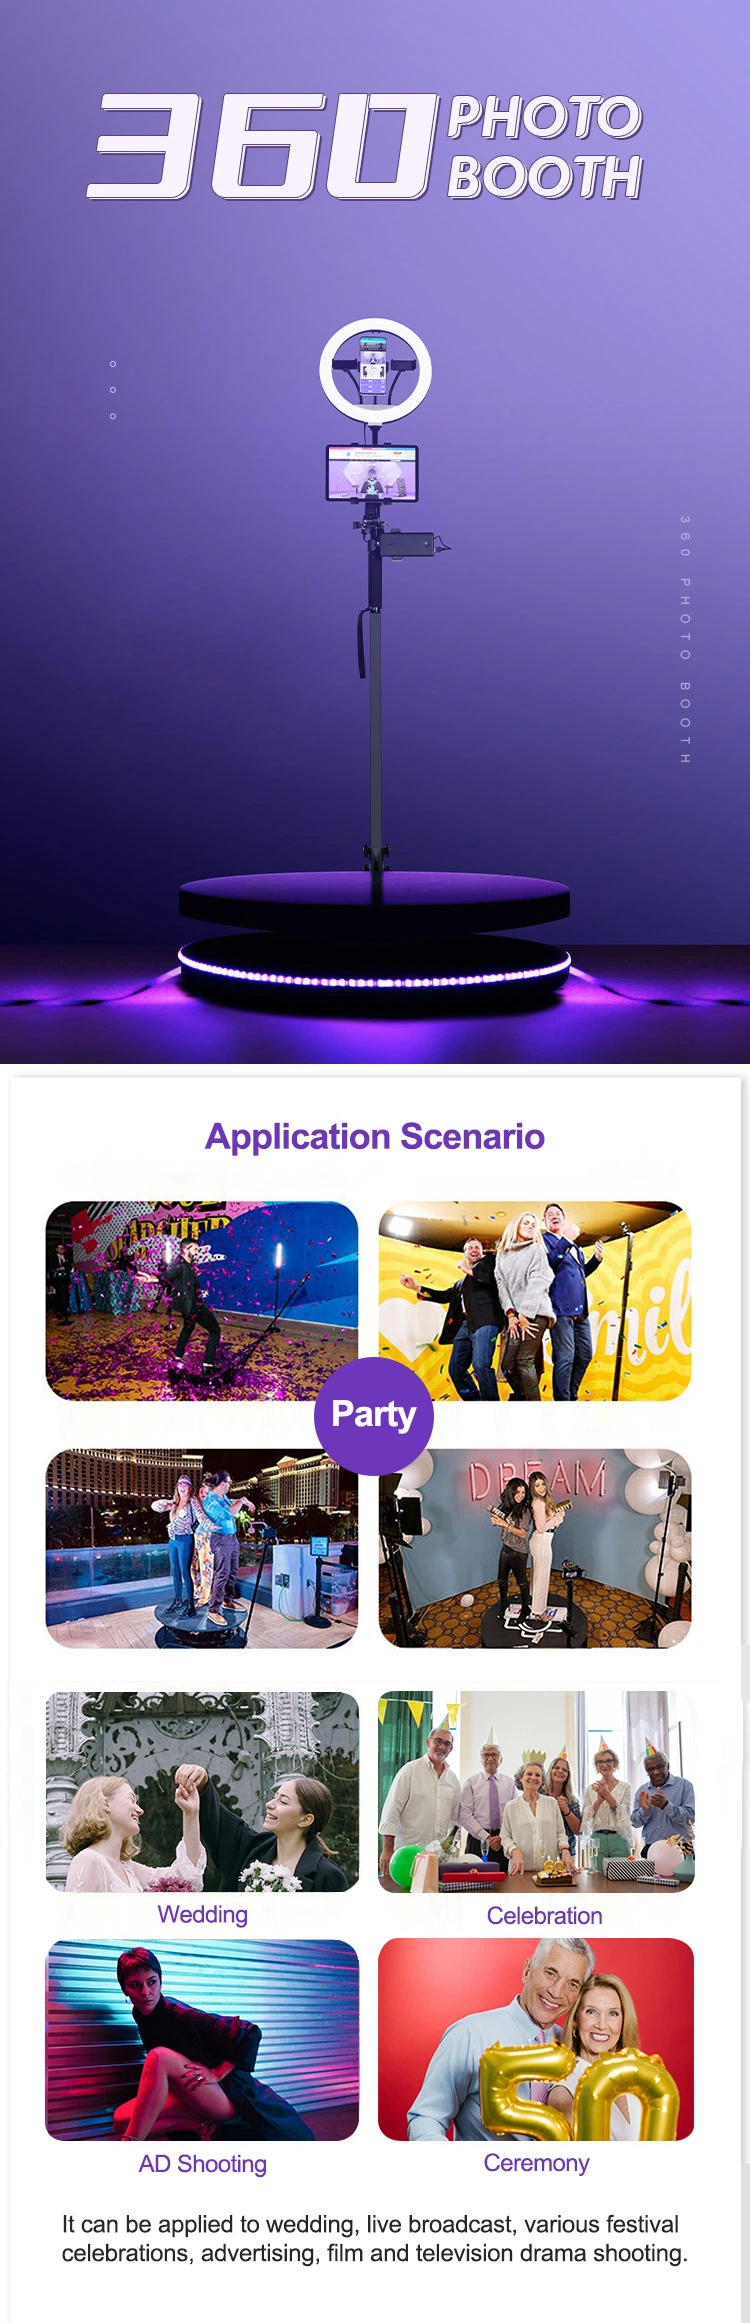 New Slow Motion Rotating 360 Photo Booth Wireless 2022 360 Degree Photo Booth for Festival Wedding Event Party